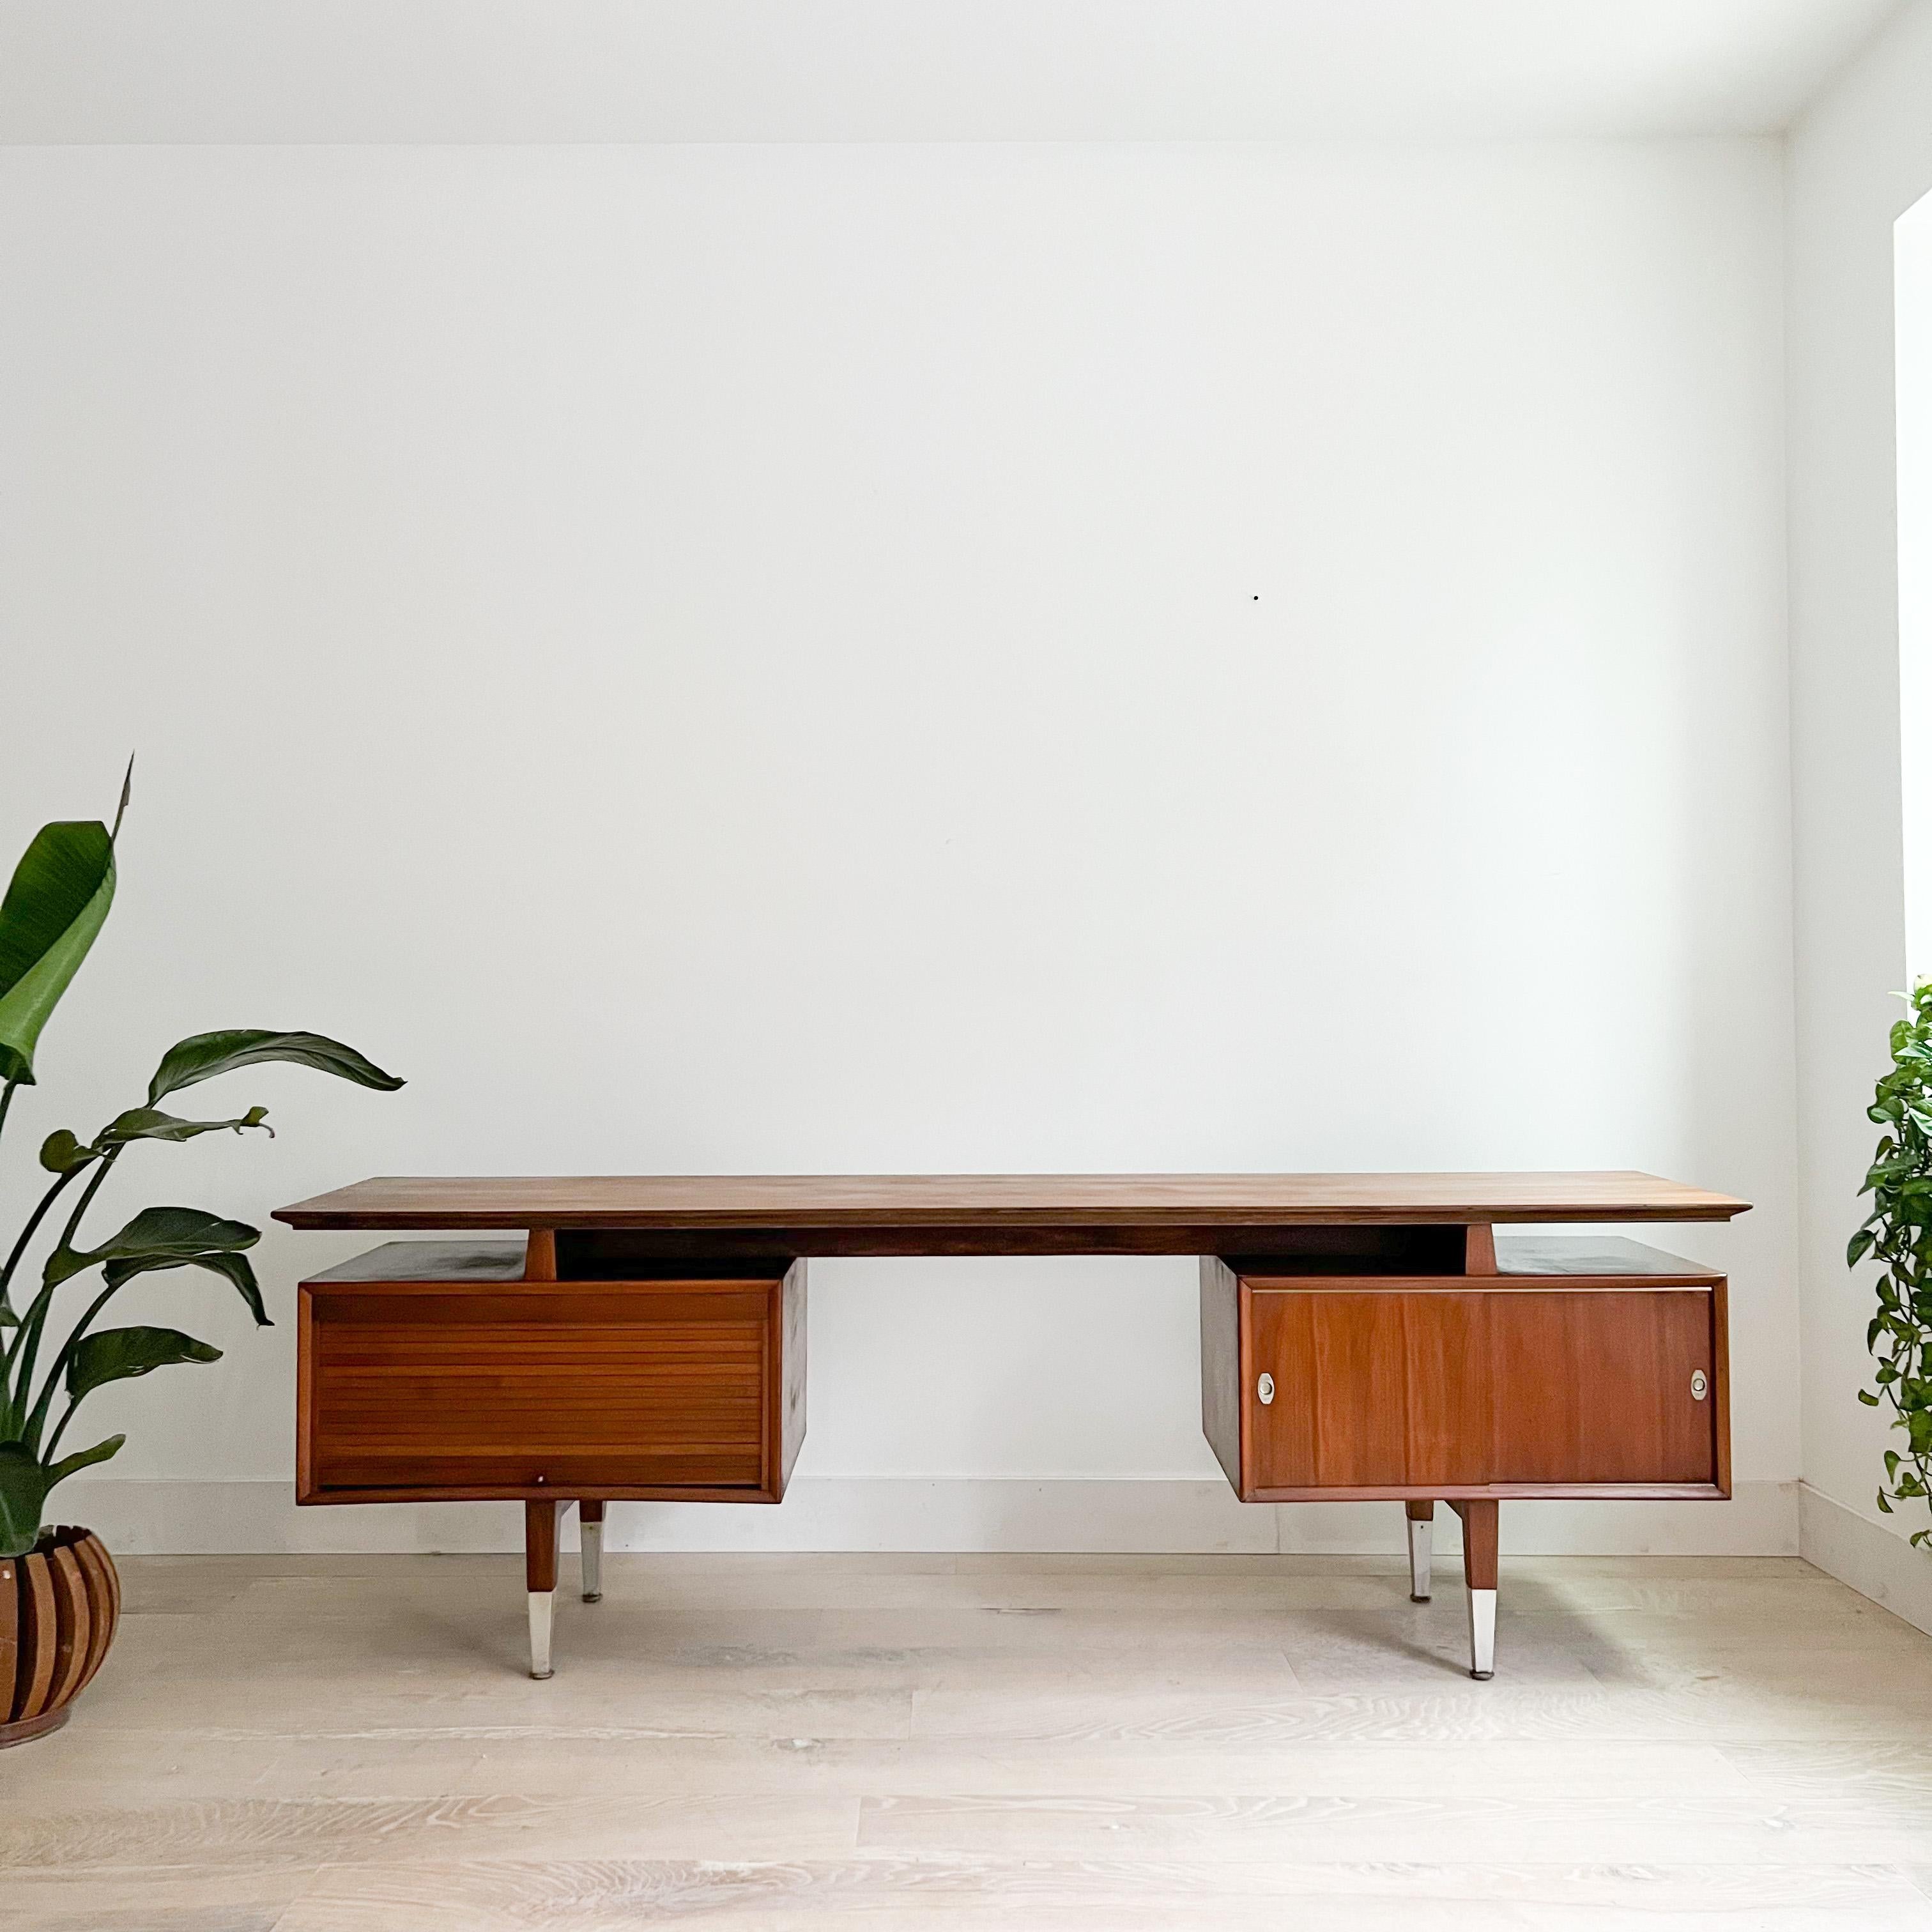 Step into the world of mid-century design with this exceptional mid-century modern walnut desk. Crafted with meticulous attention to detail, it embodies the enduring charm of mid-century aesthetics.

This desk is not just a piece of furniture; it's